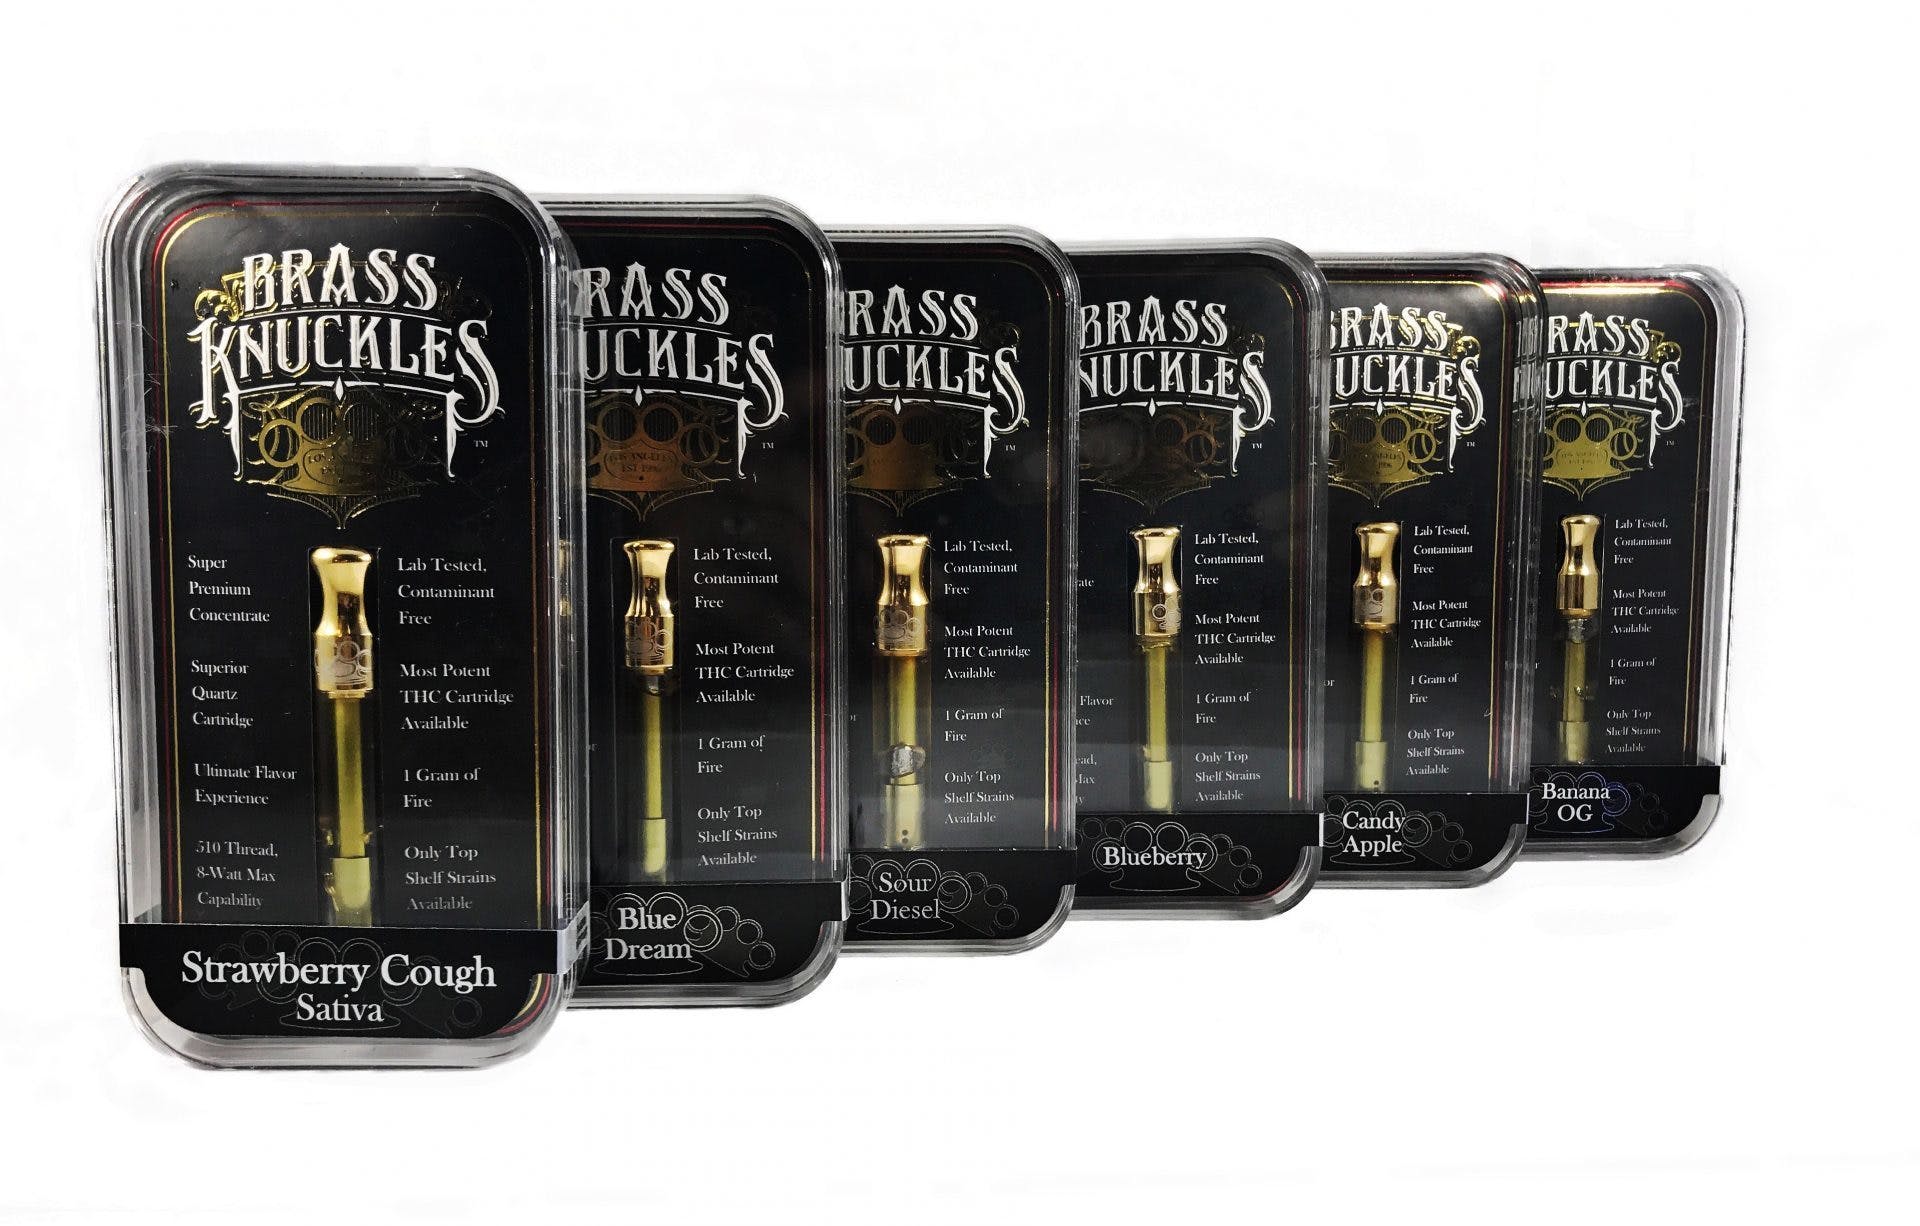 concentrate-brass-knuckles-sour-apple-3-for-only-90-21-mix-and-match